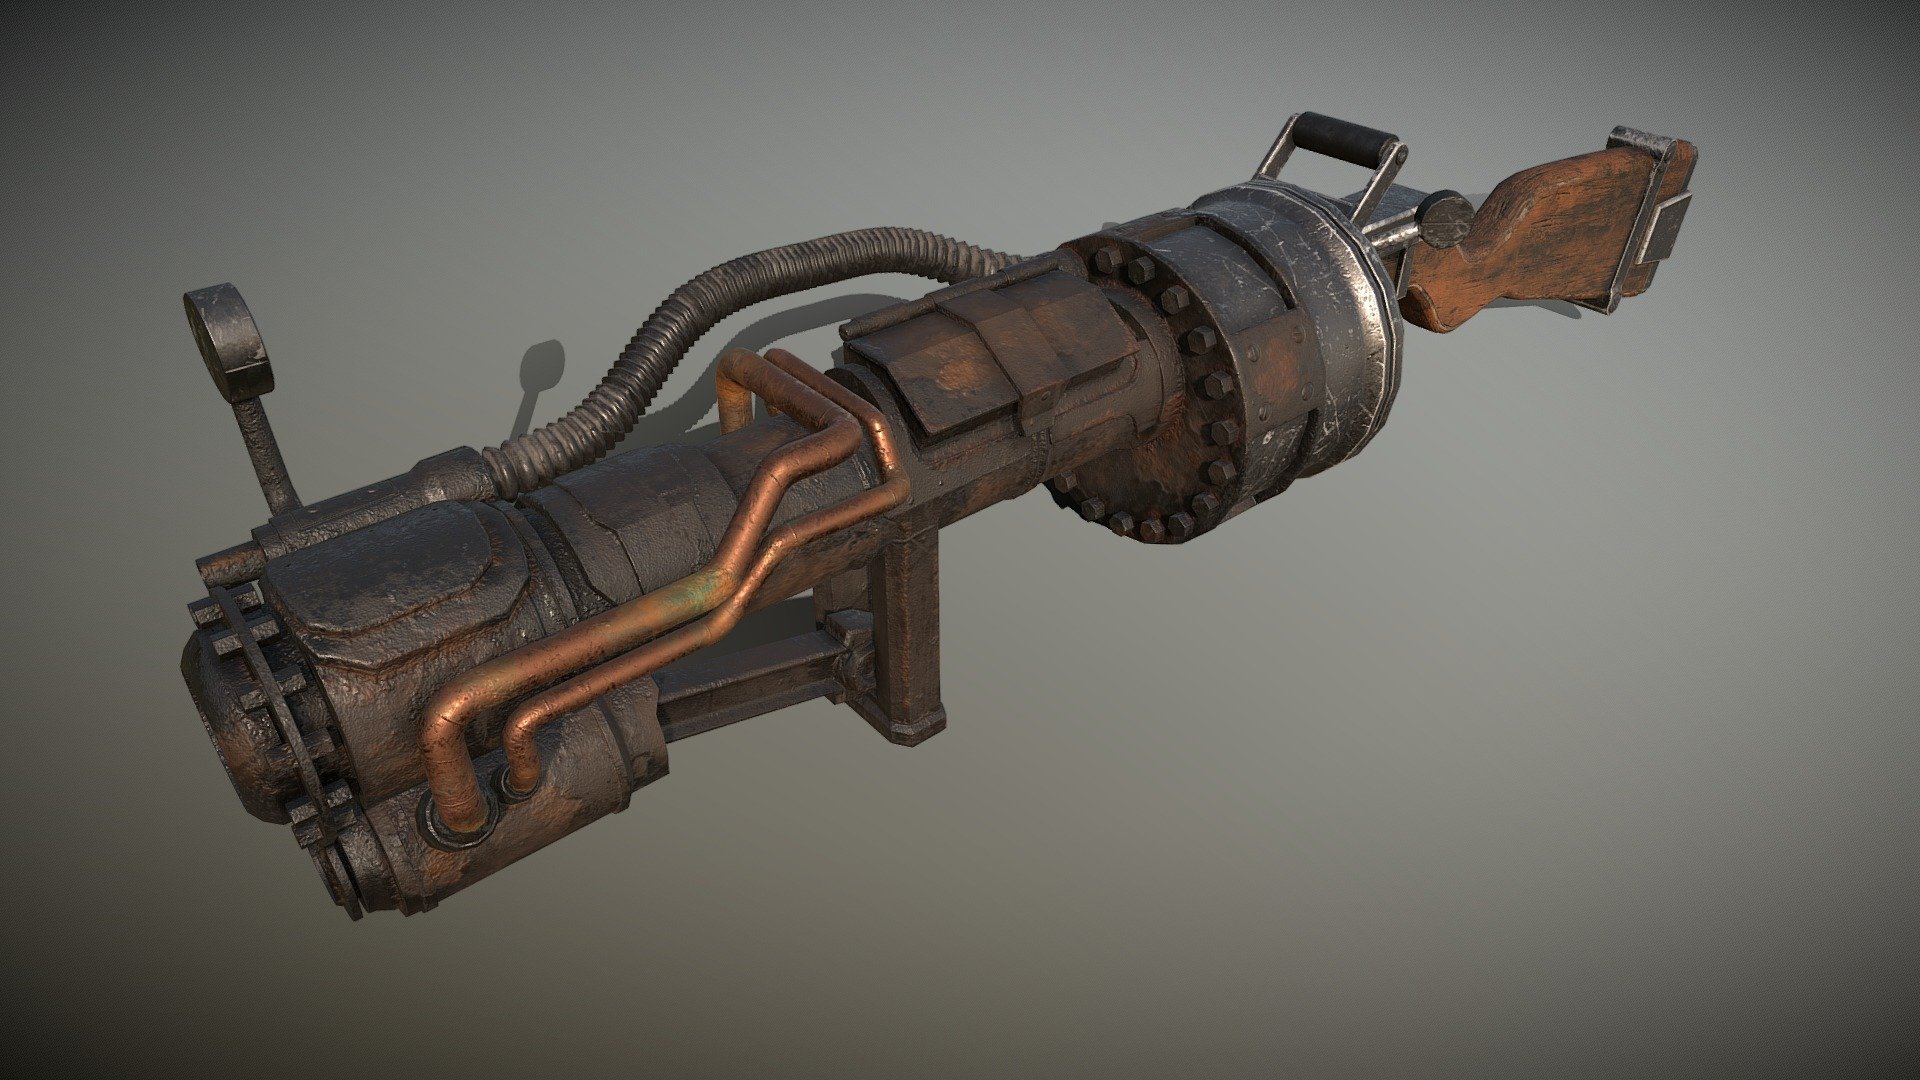 Rail Spike Gun based on the Railway Rifle concept from the Fallout world.  A device fashioned from various scrap items making used of compressed hot air to launch railspikes.  For purposes of protection and survival 3d model